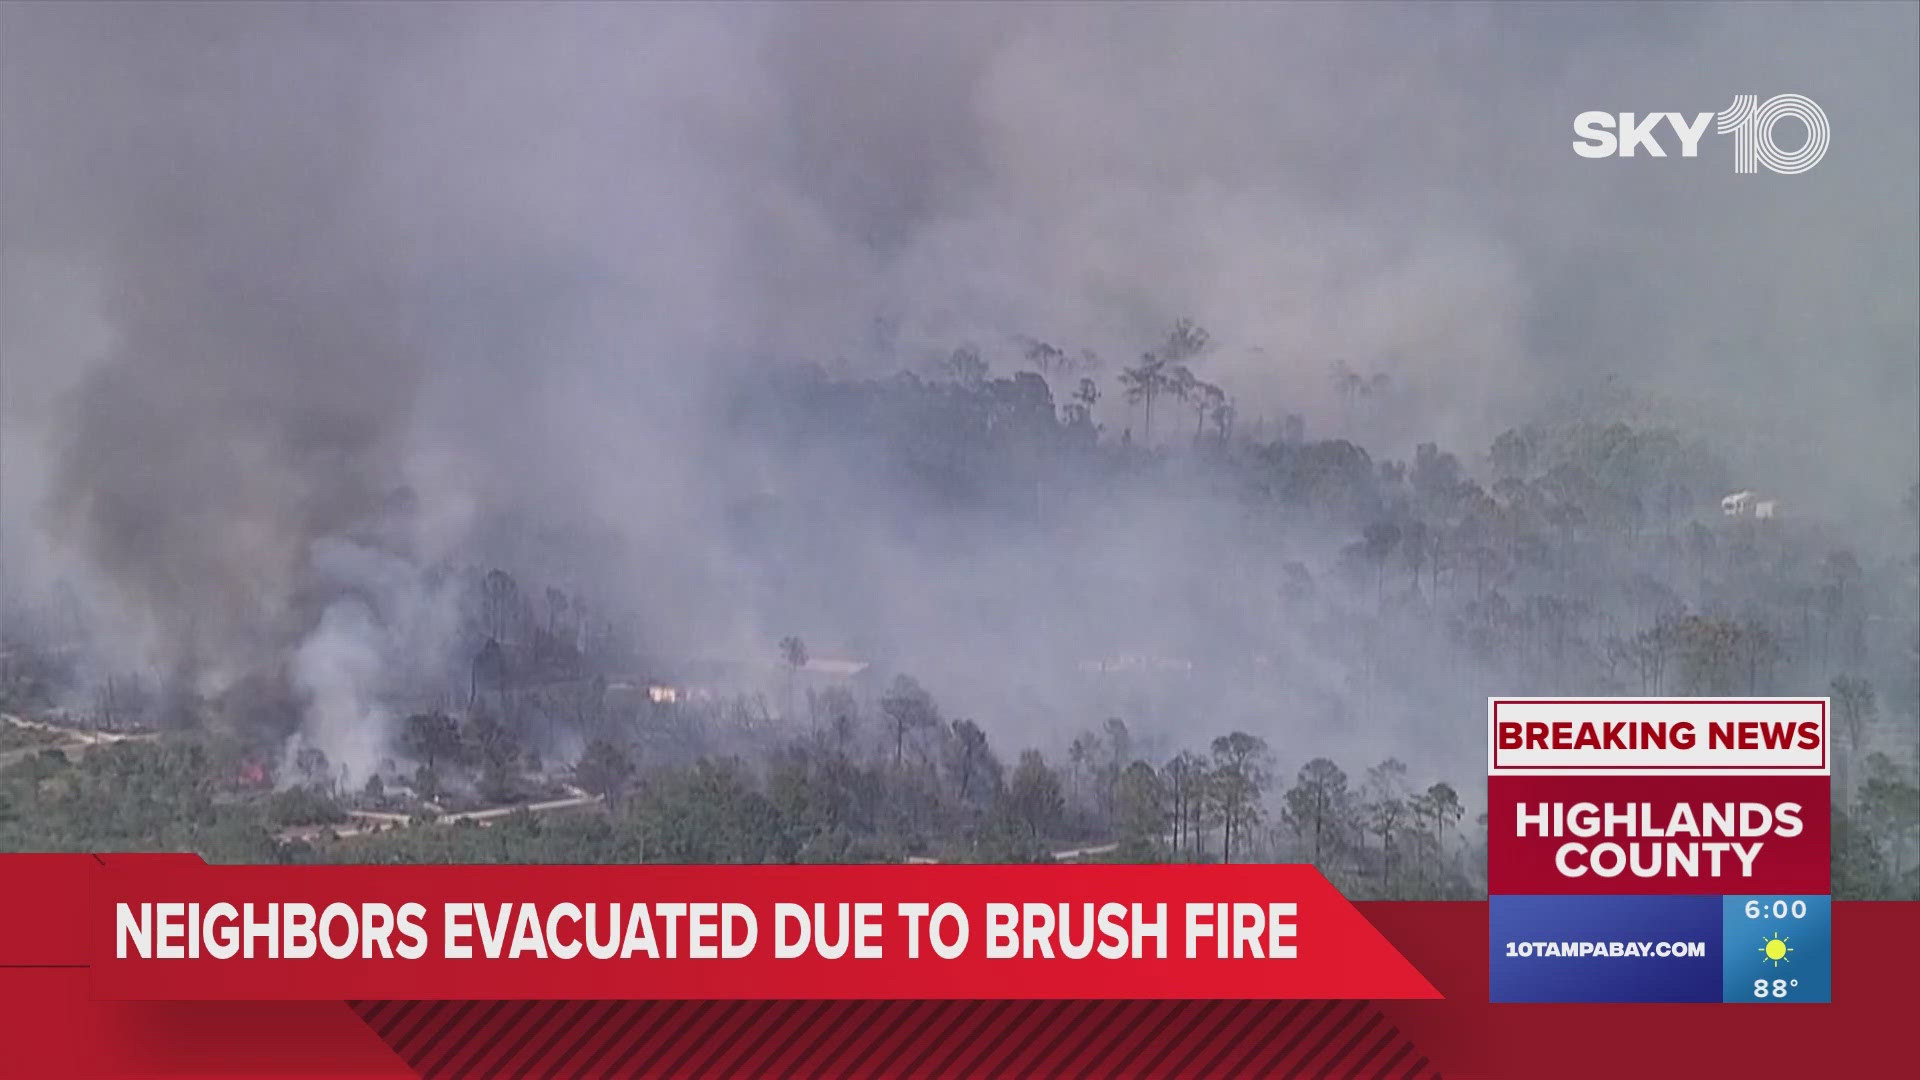 The fire has spread to about 100 acres, according to the Florida Forest Service.